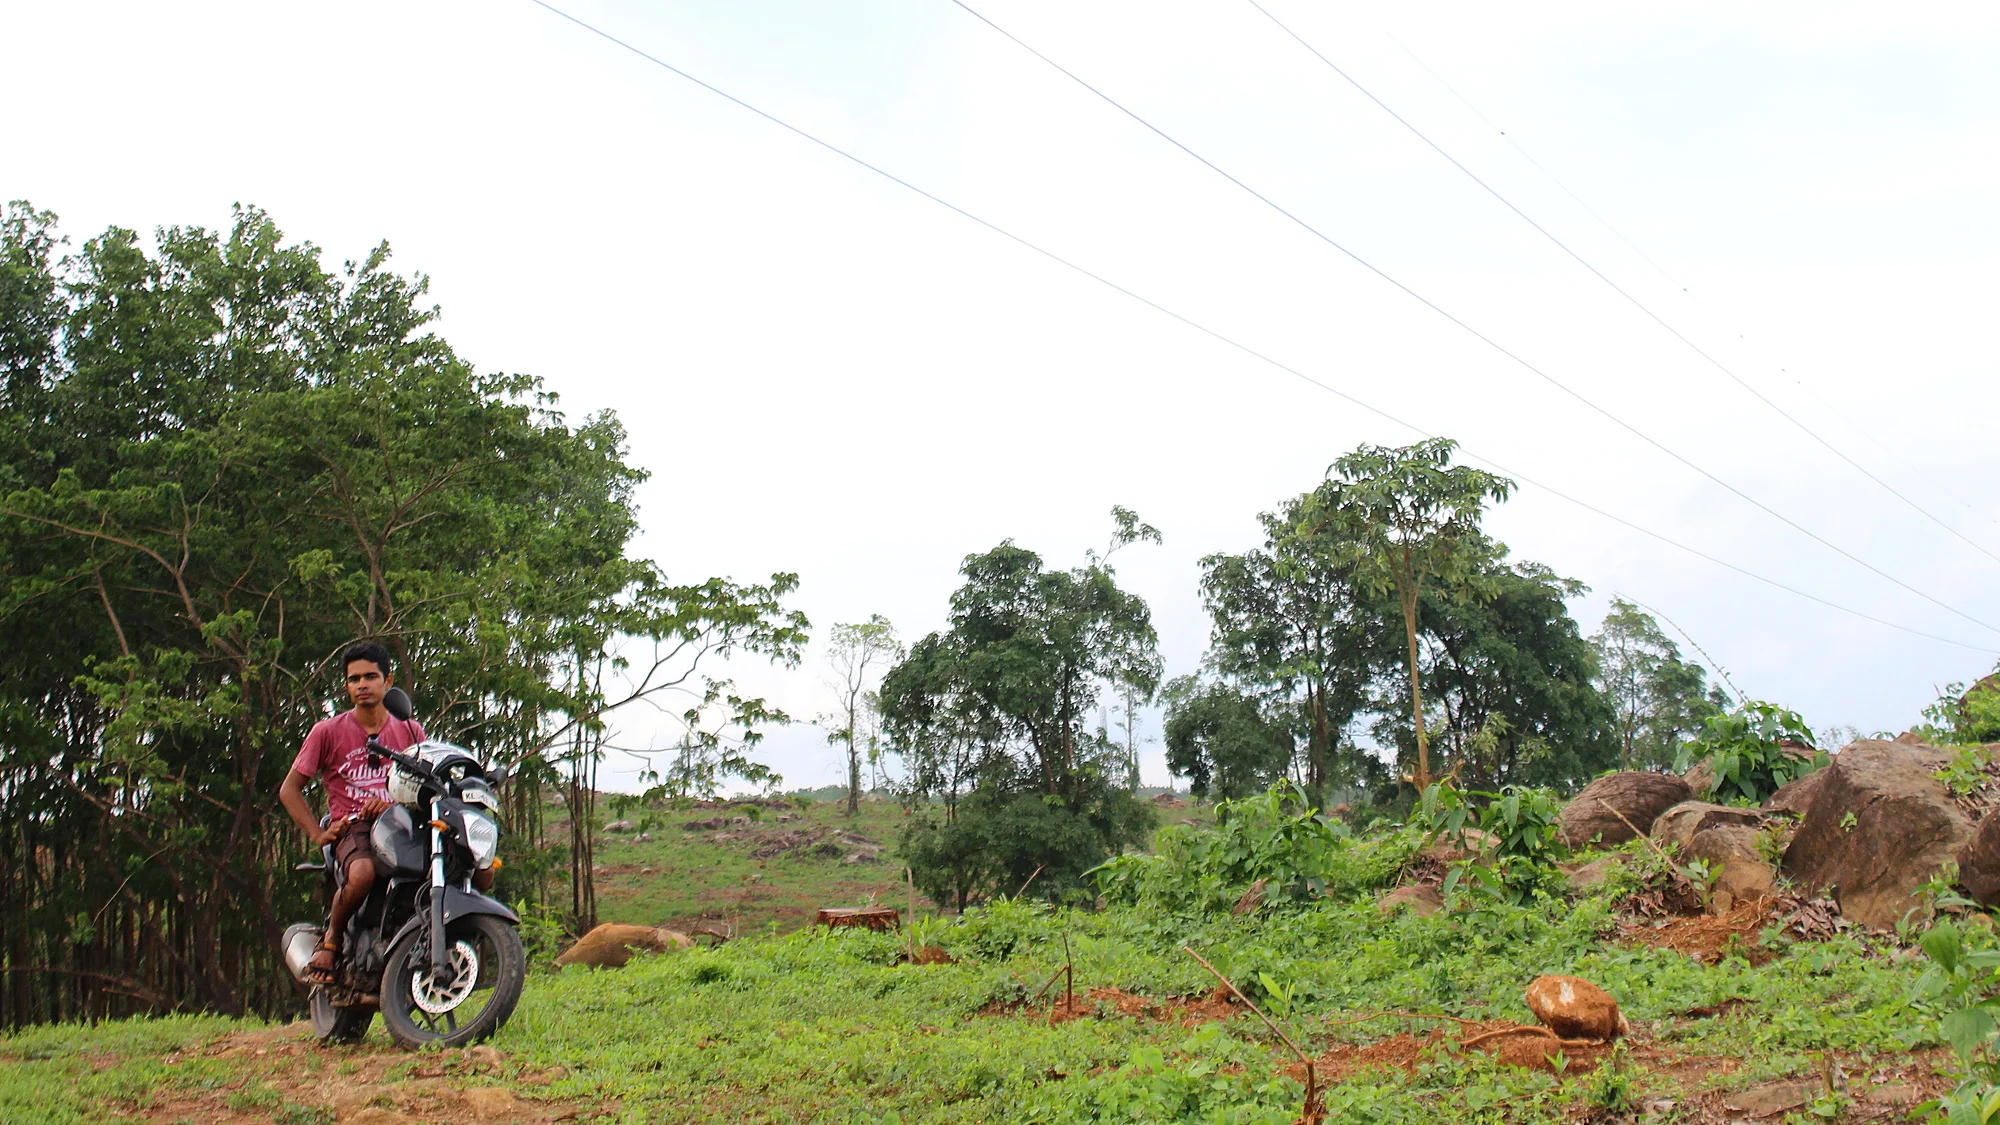 Monsoon travel in Kerala. A young man from Kerala posing in a green hill with a motorcycle.